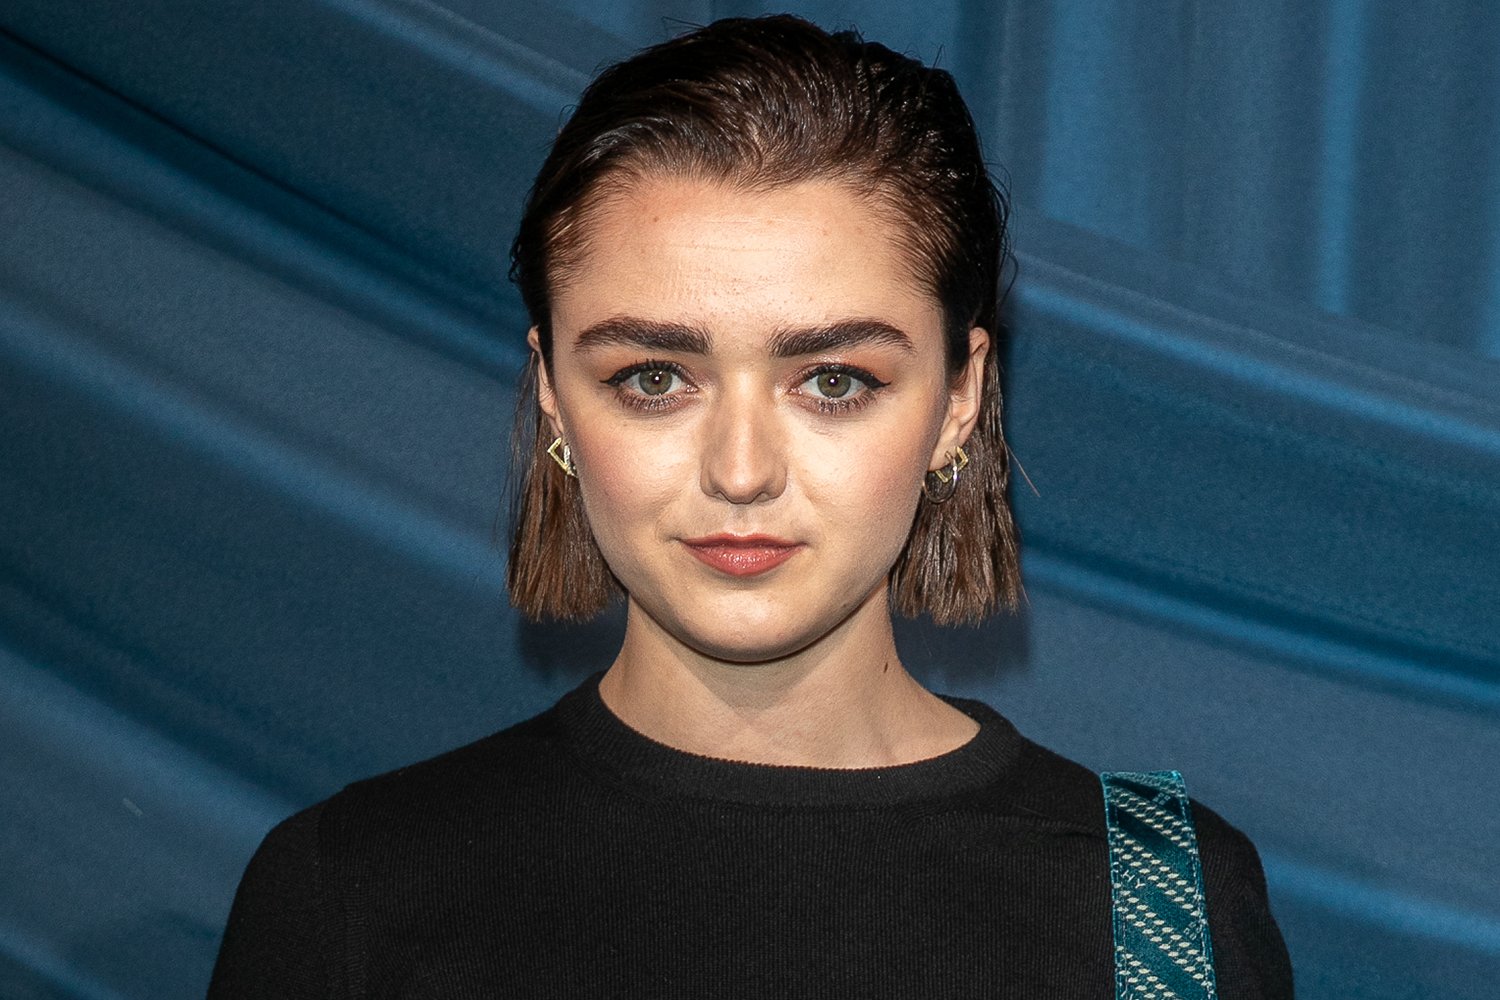 Actress Maisie Williams attends the #BoF500 gala during Paris Fashion Week Spring/Summer 2020 at Hotel de Ville on September 30, 2019 in Paris, France.